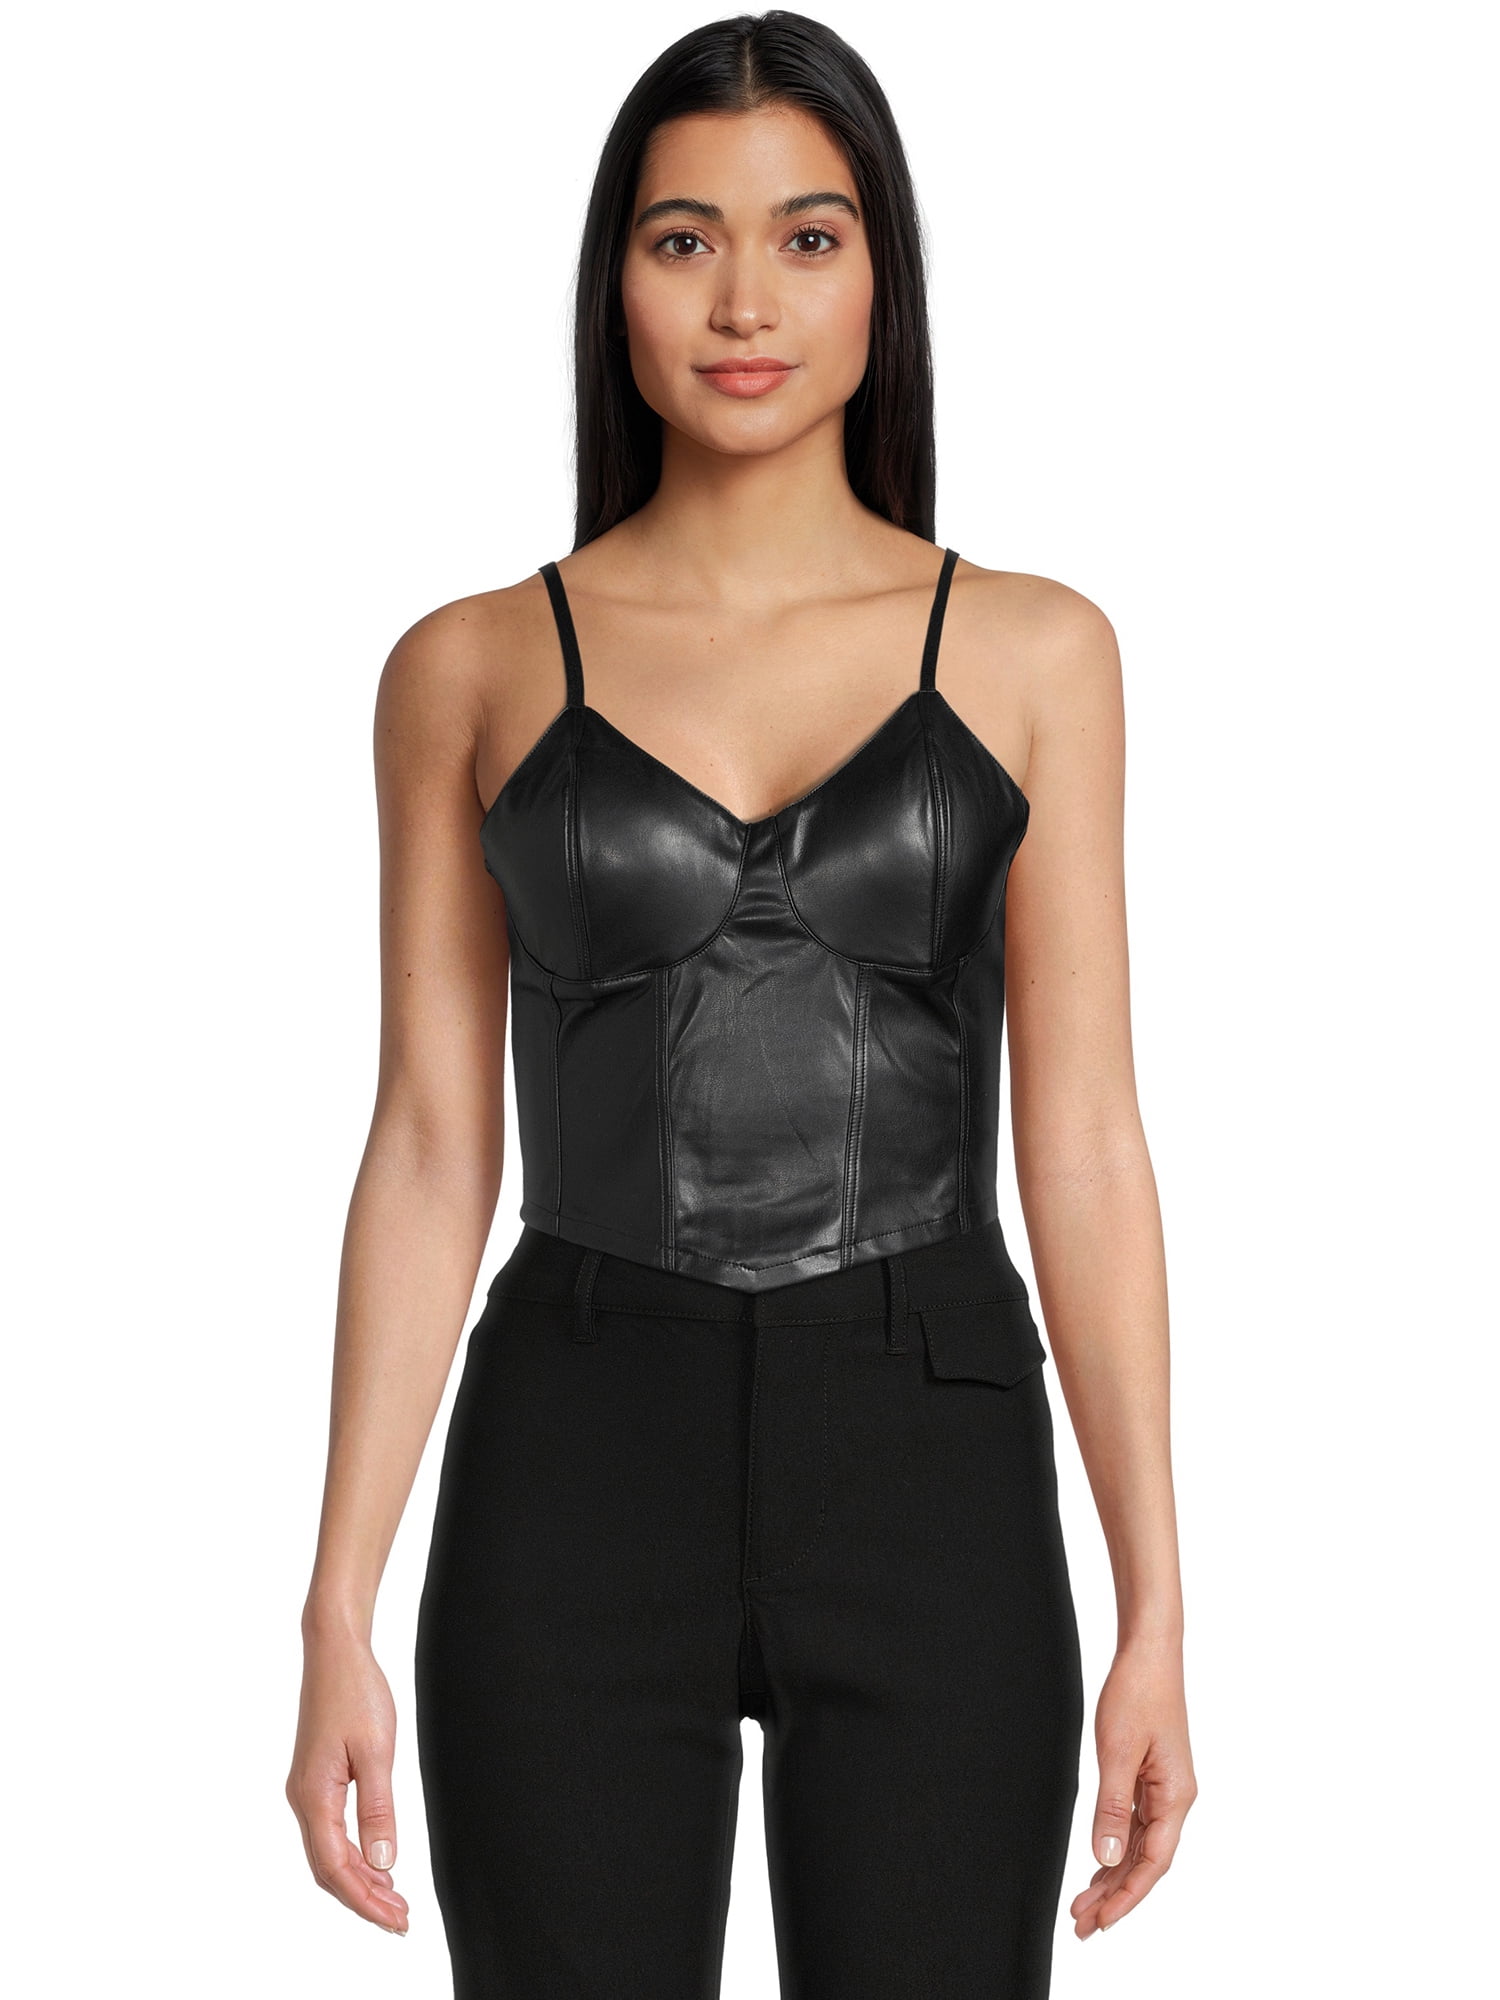 Madden NYC Juniors' Faux Leather Bustier Top